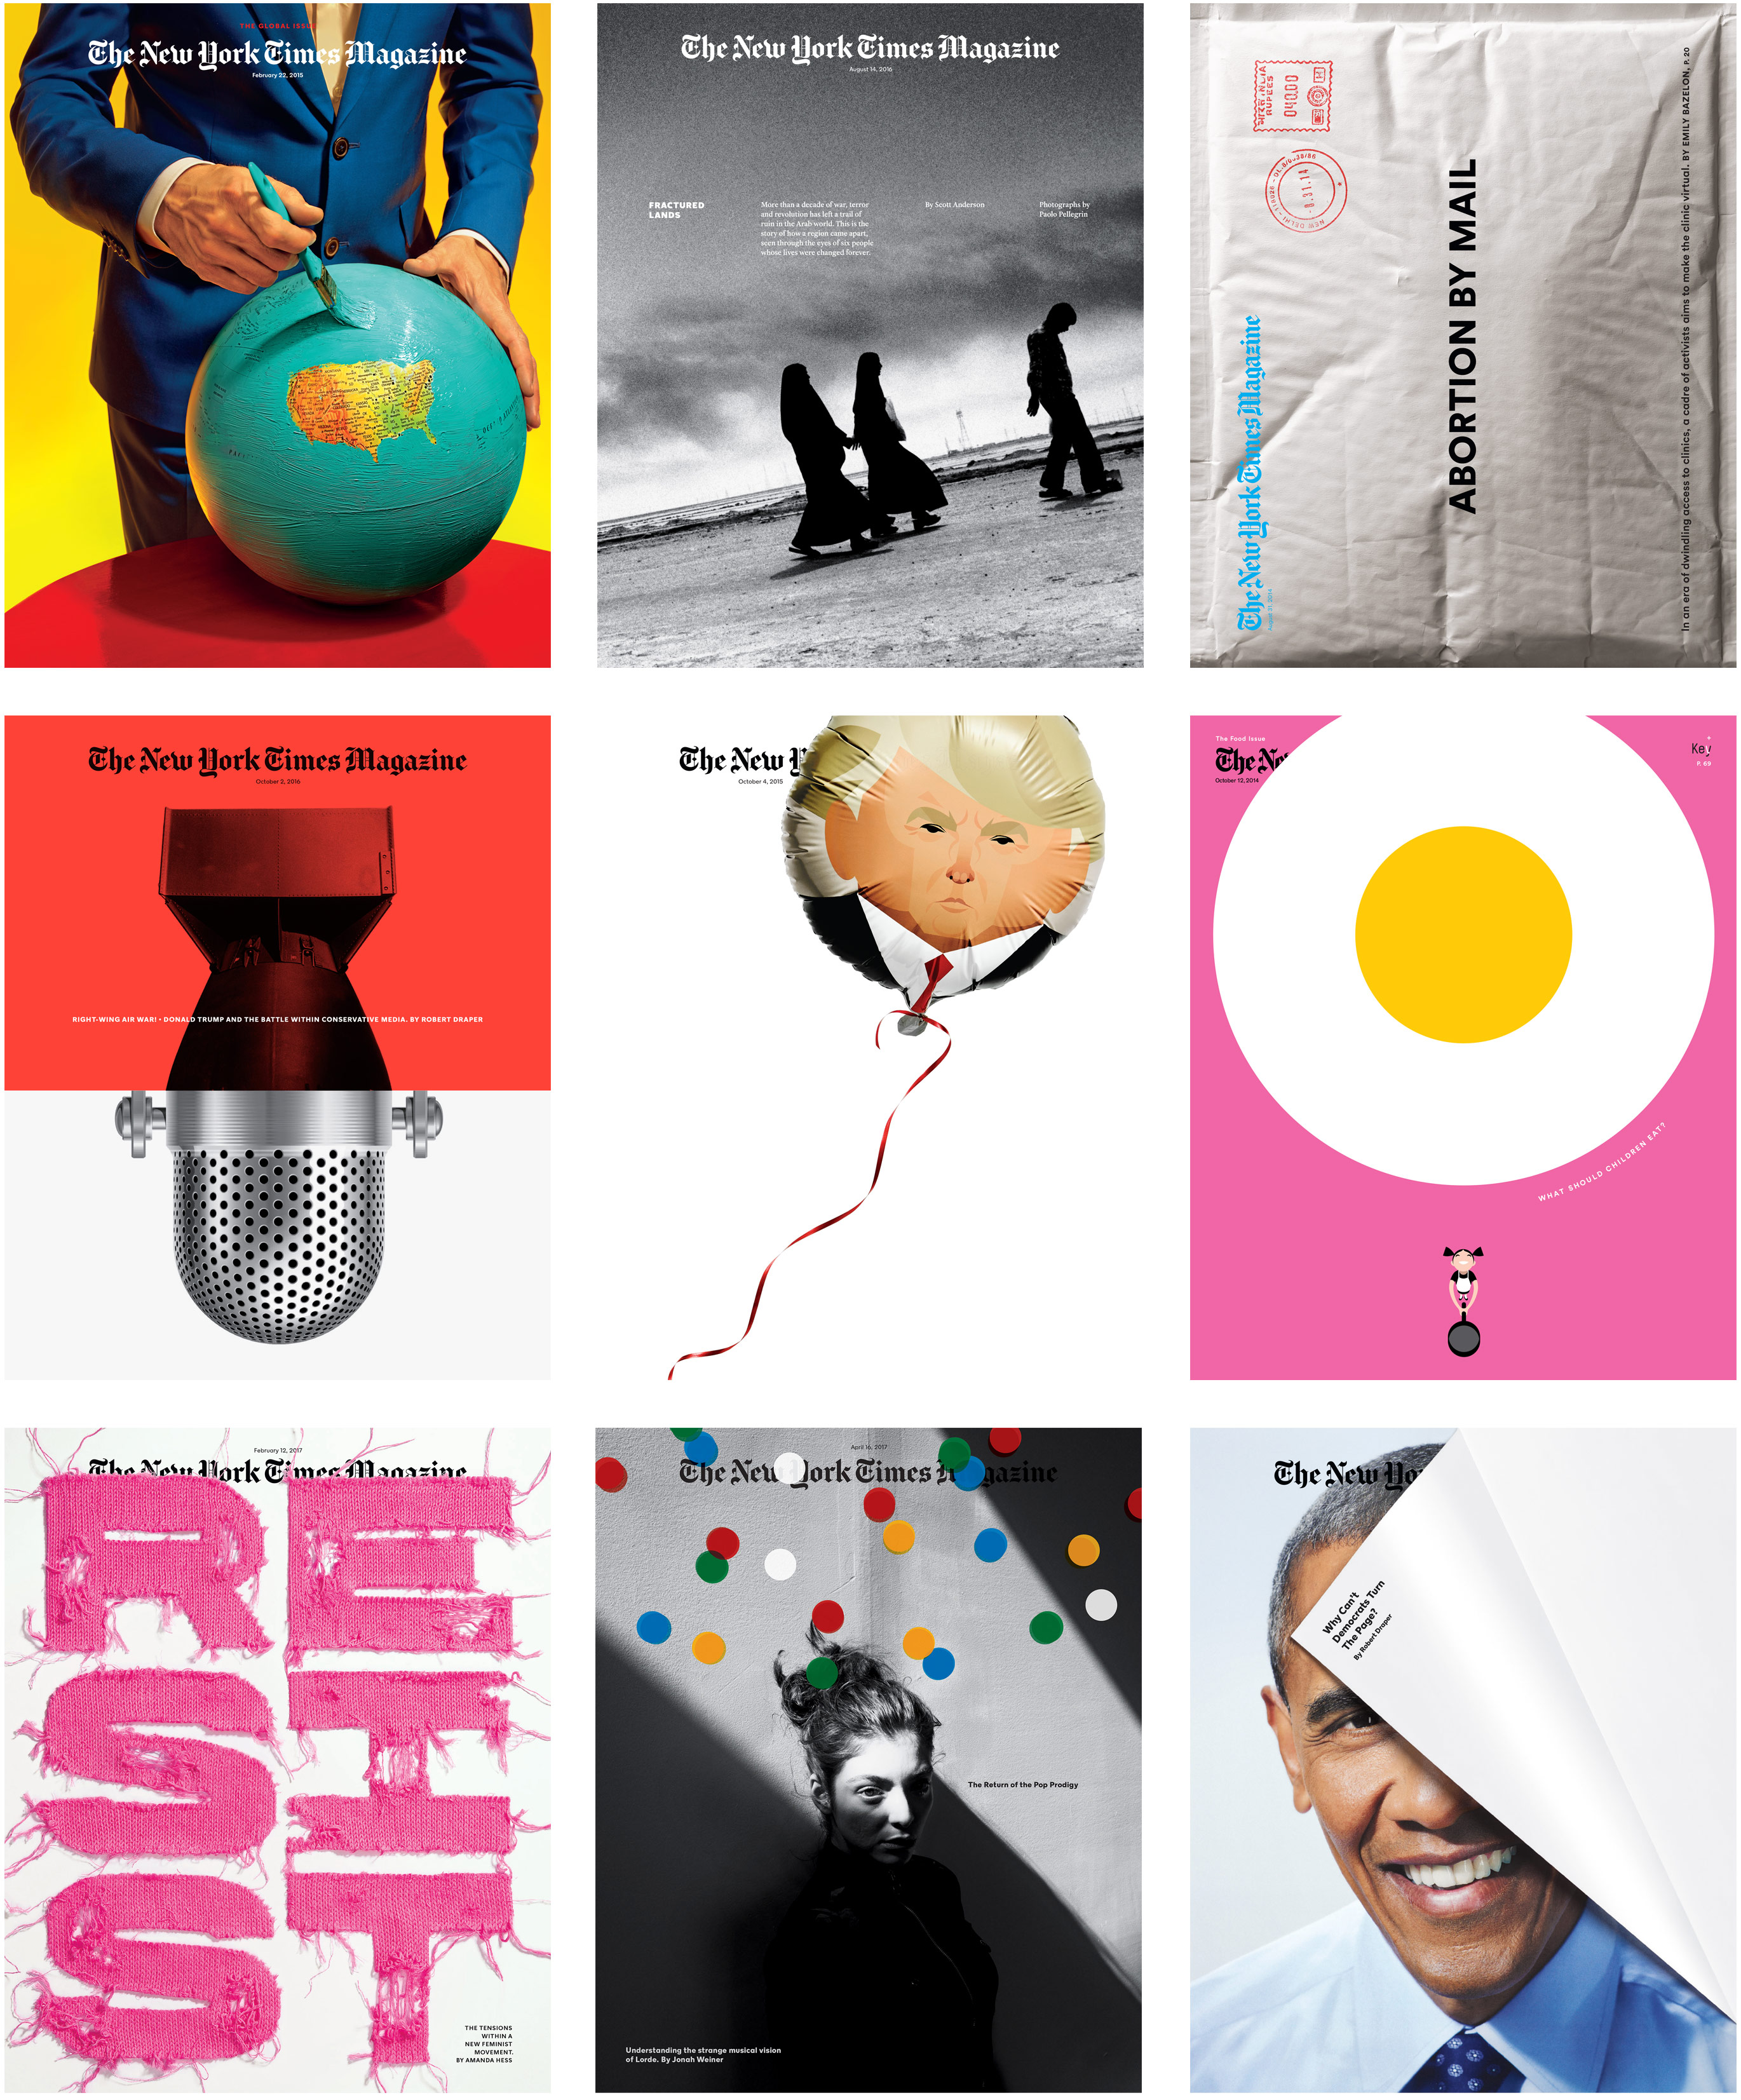 New York Times Magazine covers 